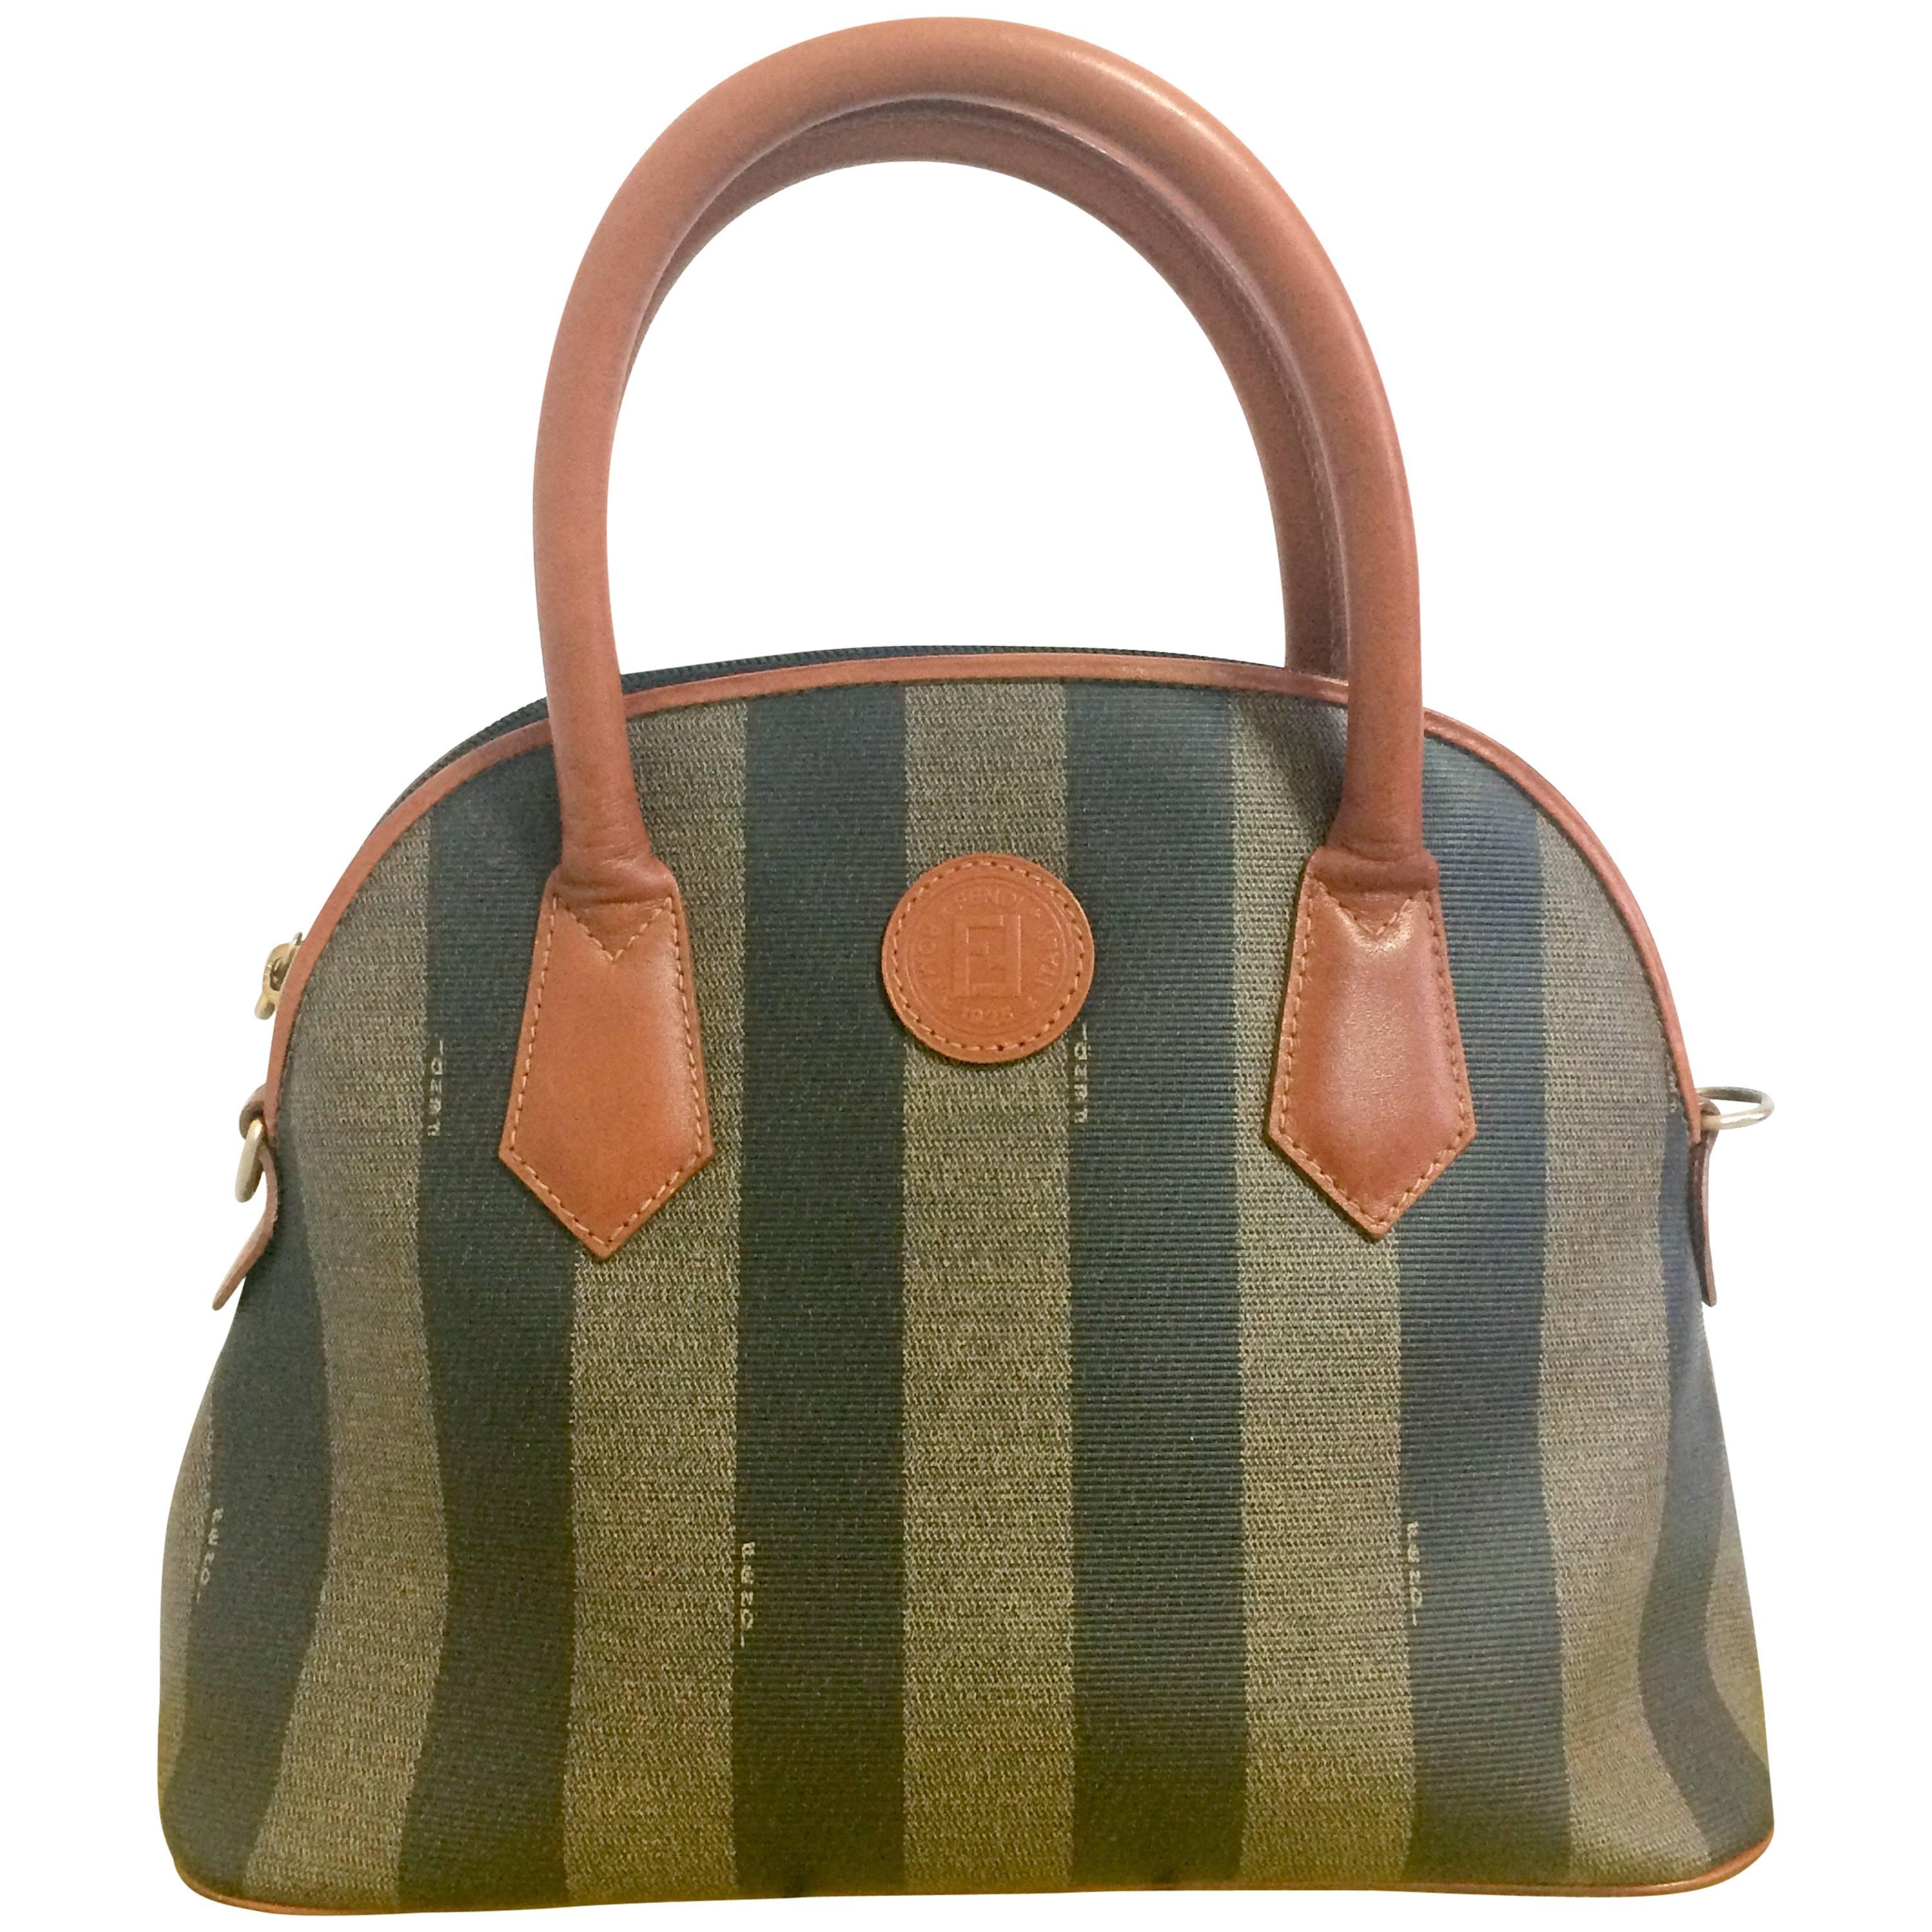 Vintage FENDI pecan khaki and gray stripe bolide bag with brown leather handles.